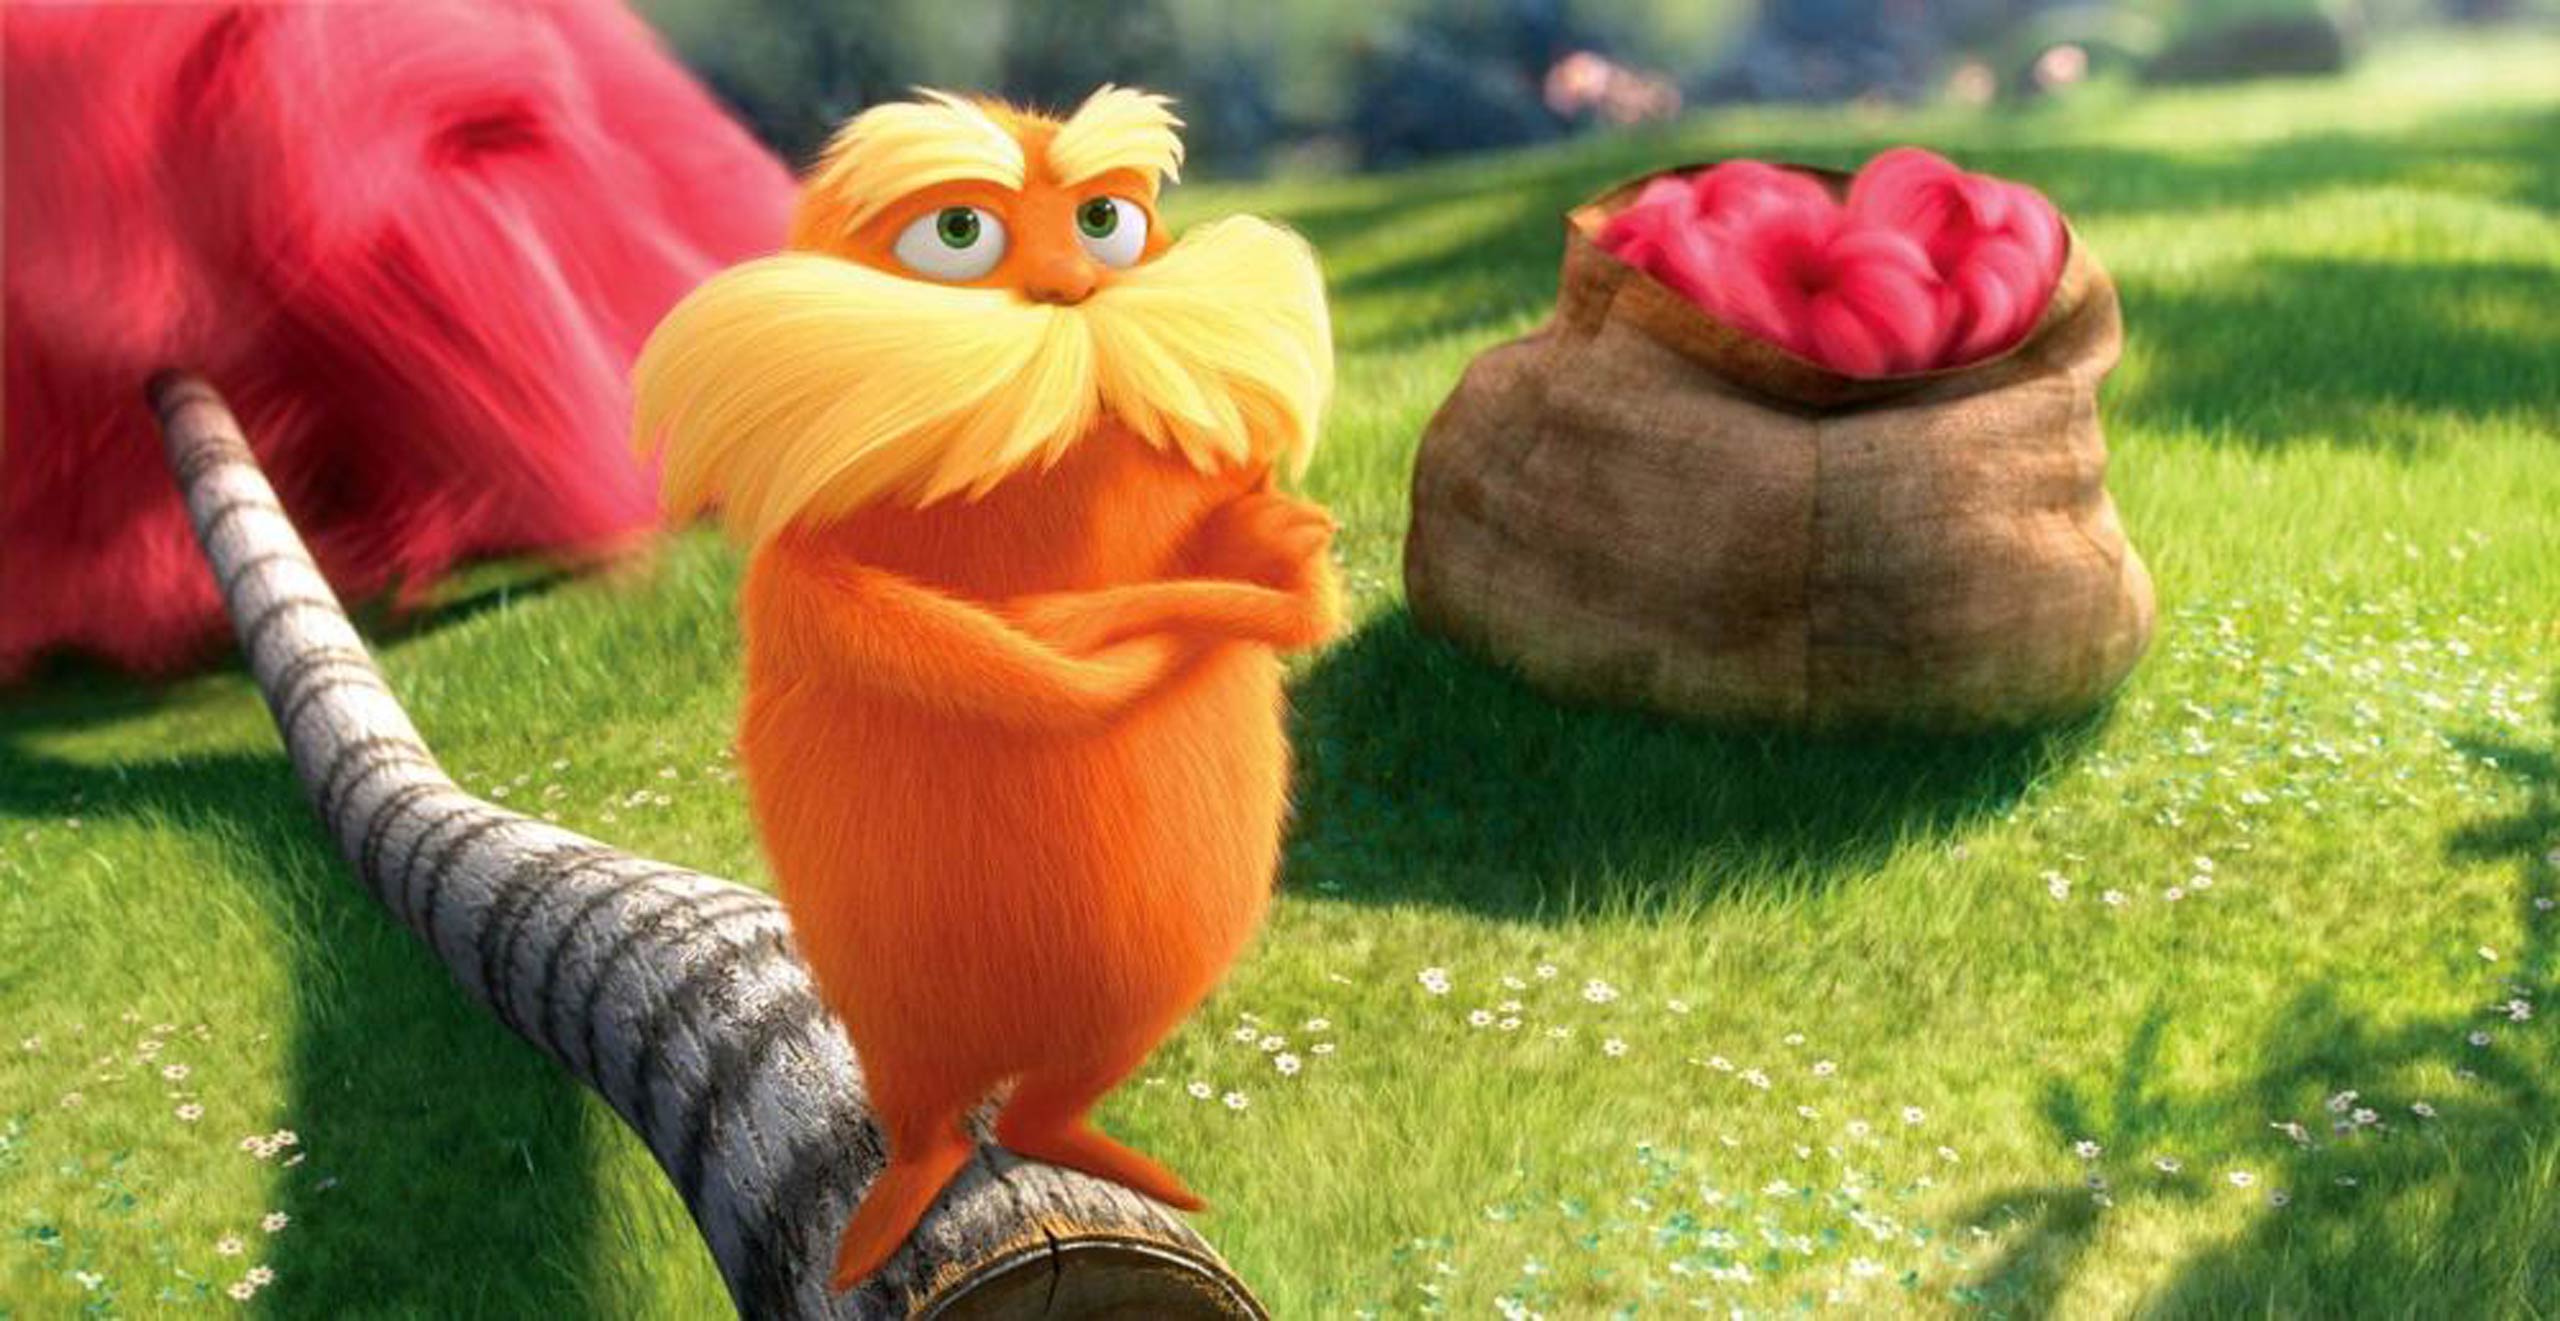 DeVito's top-grossing film? The Lorax (2012), which grossed nearly $350 at the global box office.